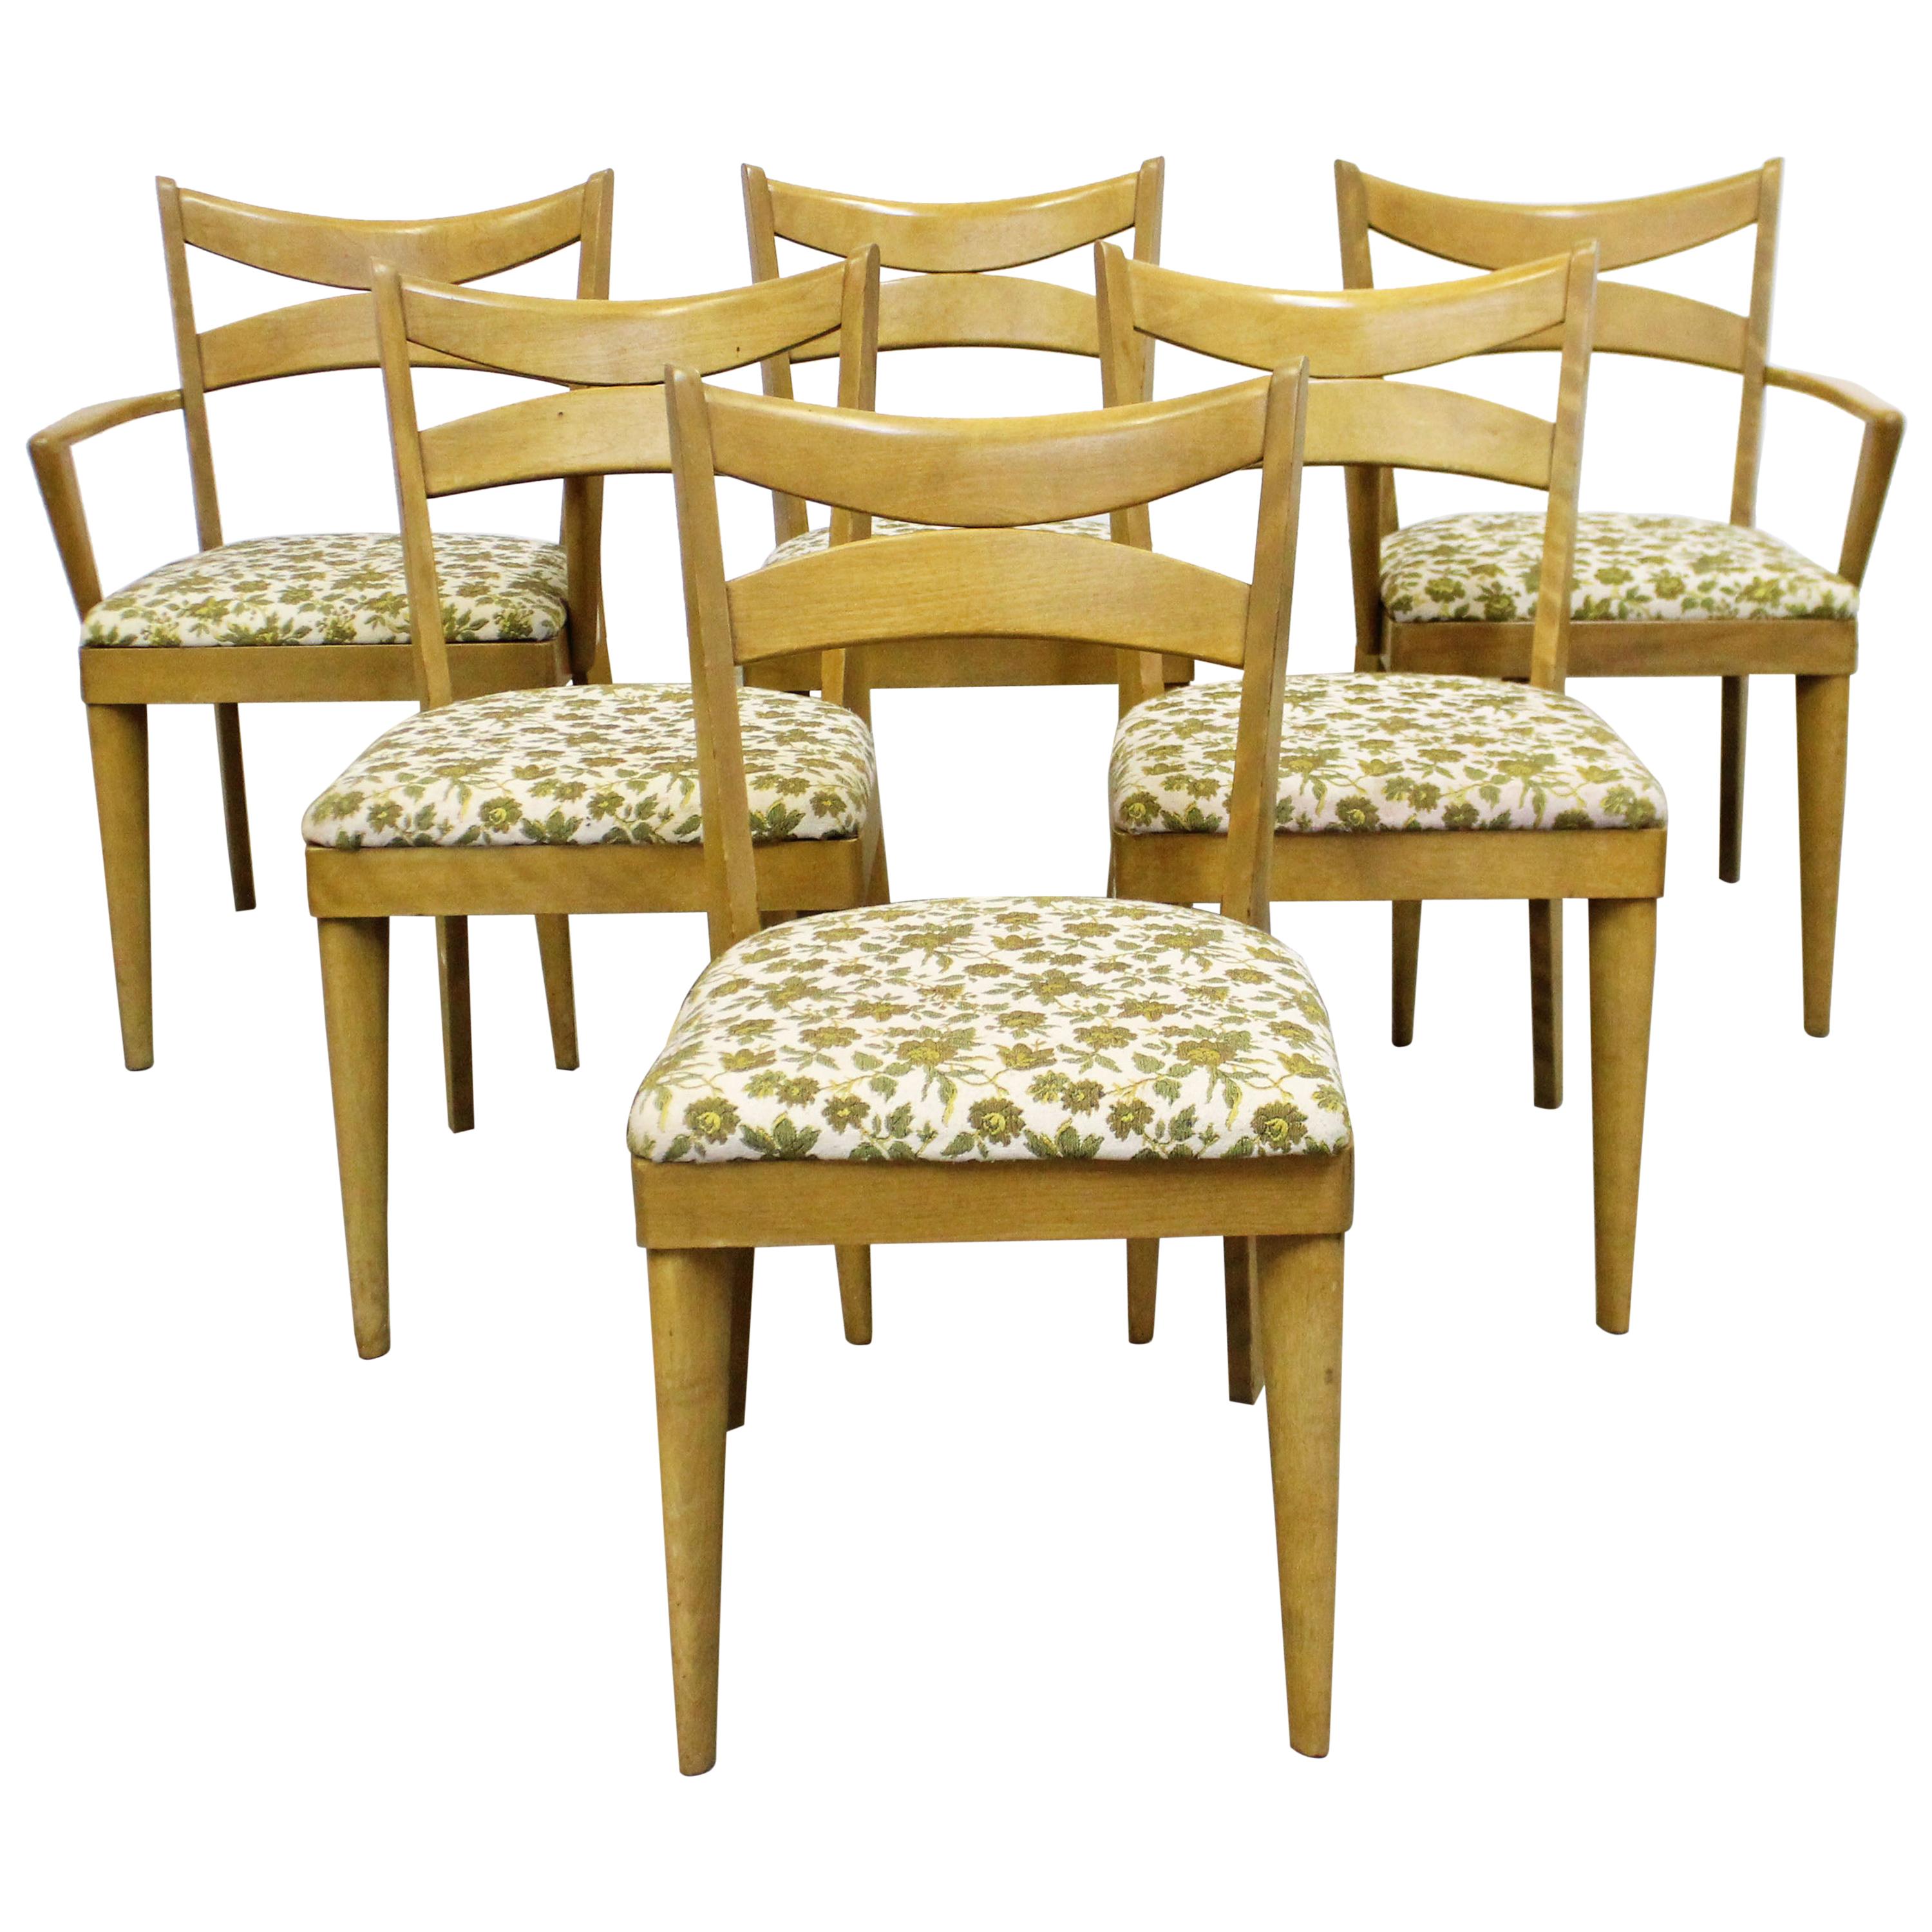 Set of 6 Mid-Century Modern Heywood Wakefield Wheat Bow Tie Dining Chairs 953